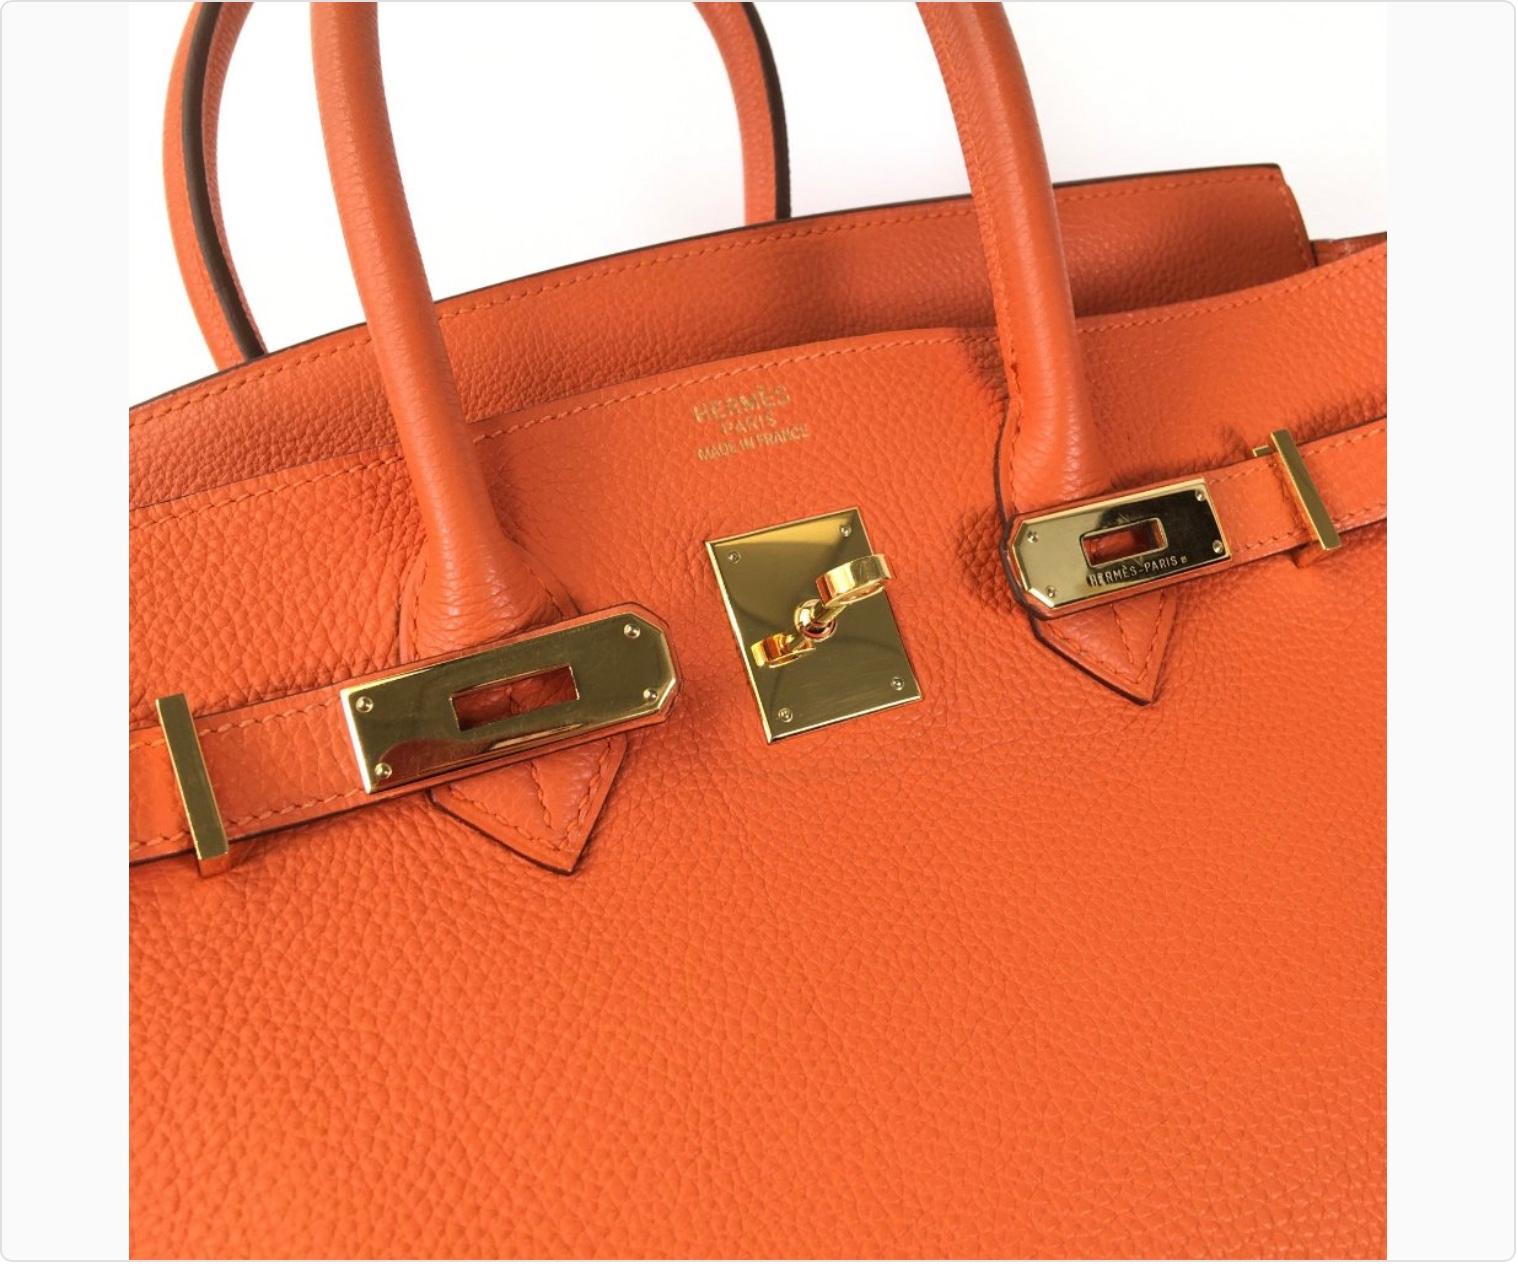 Hermes Birkin 35 In Good Condition For Sale In Calgary, AB